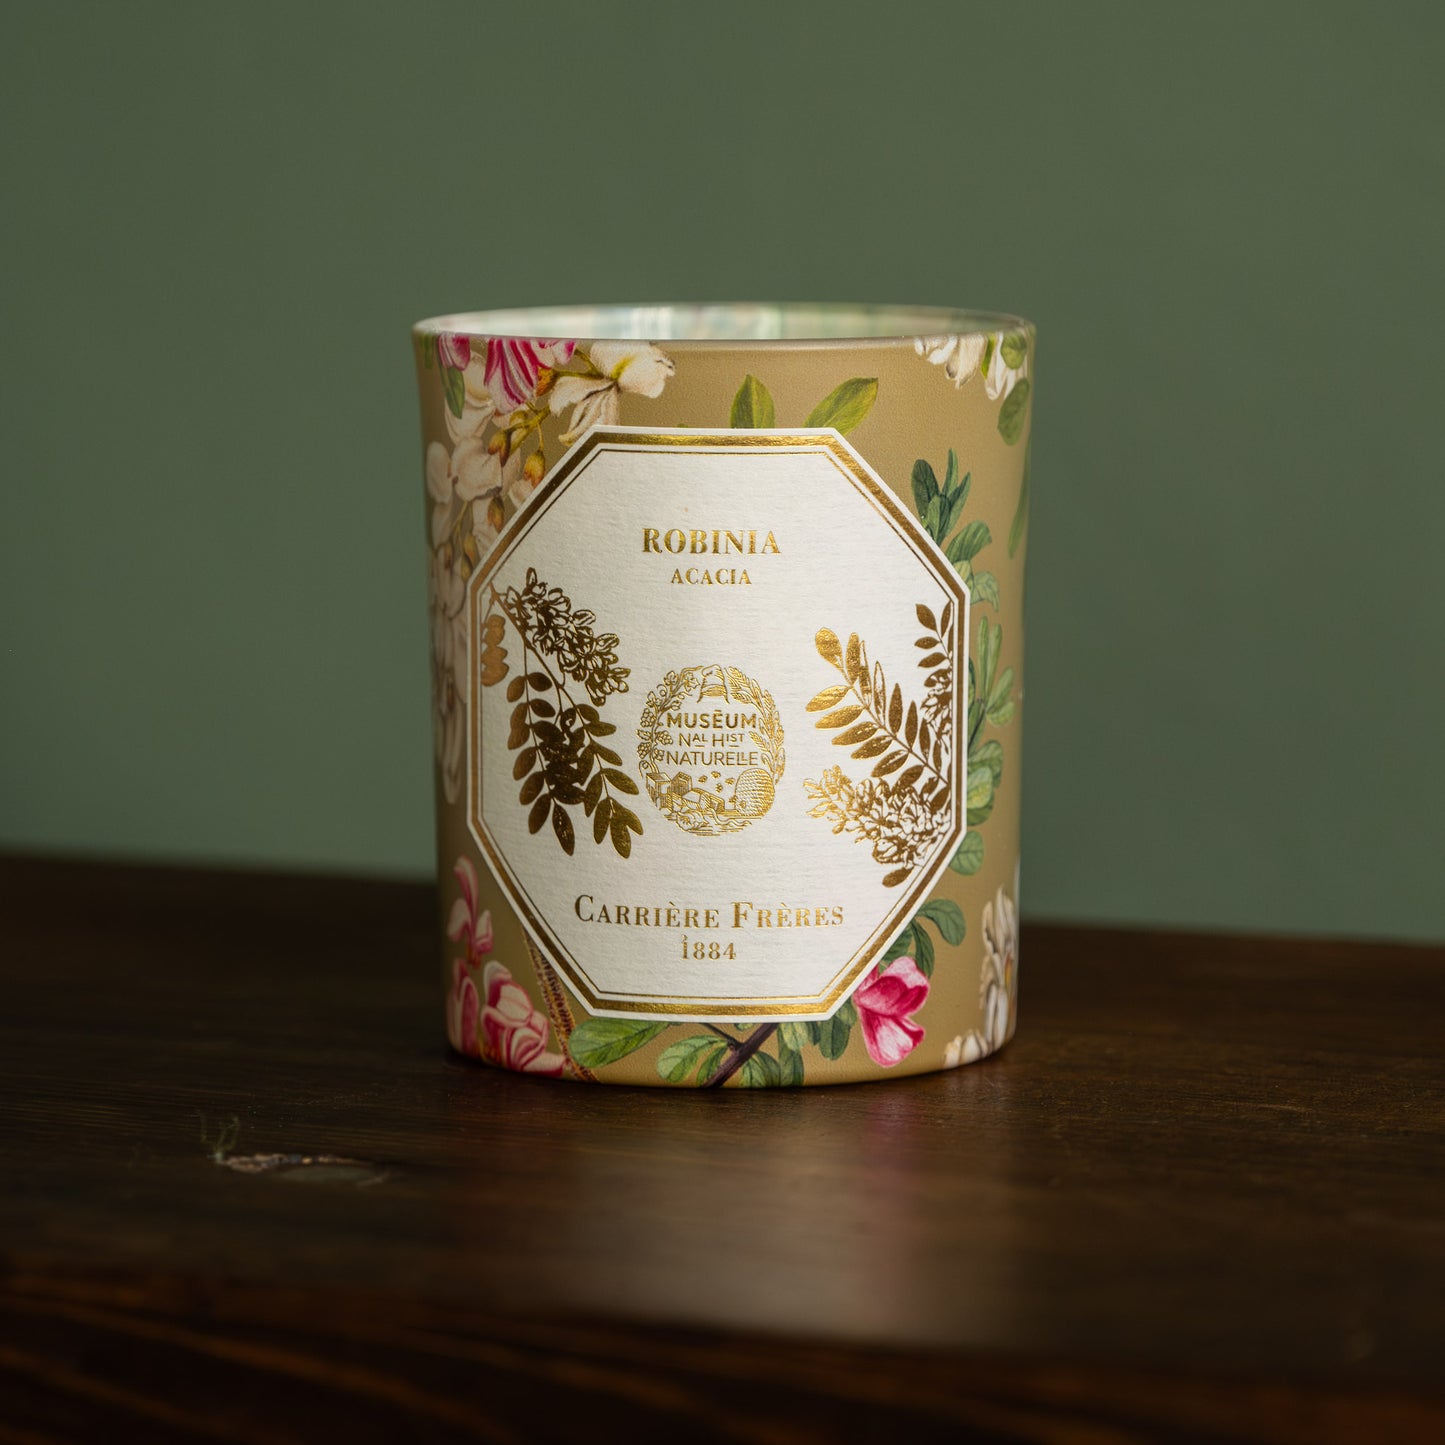 Carriere Freres Acacia Scented Candle